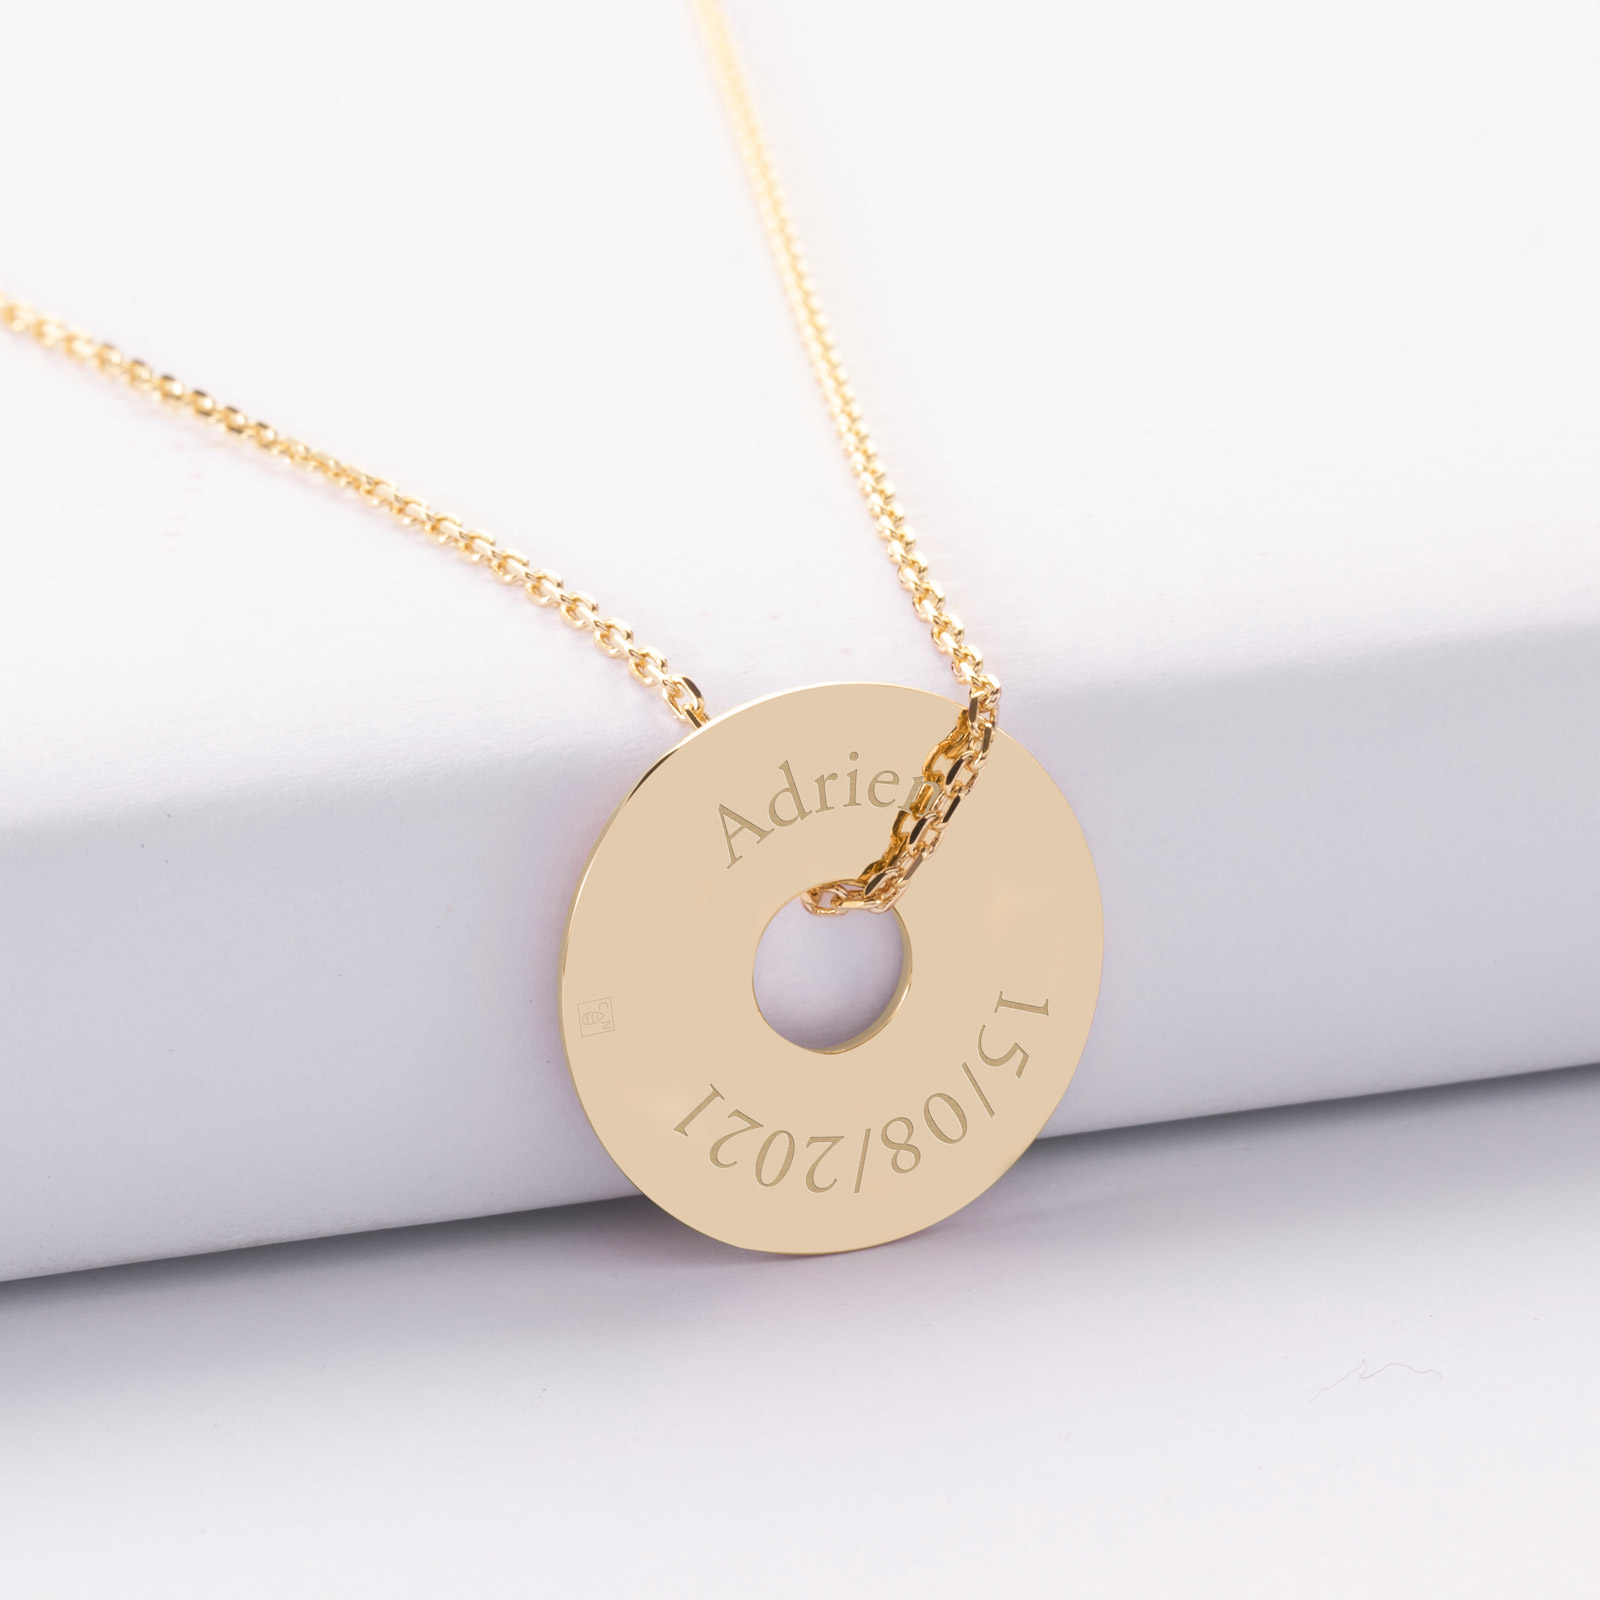 Name Engraved Disc Necklace - Gold Electroplated